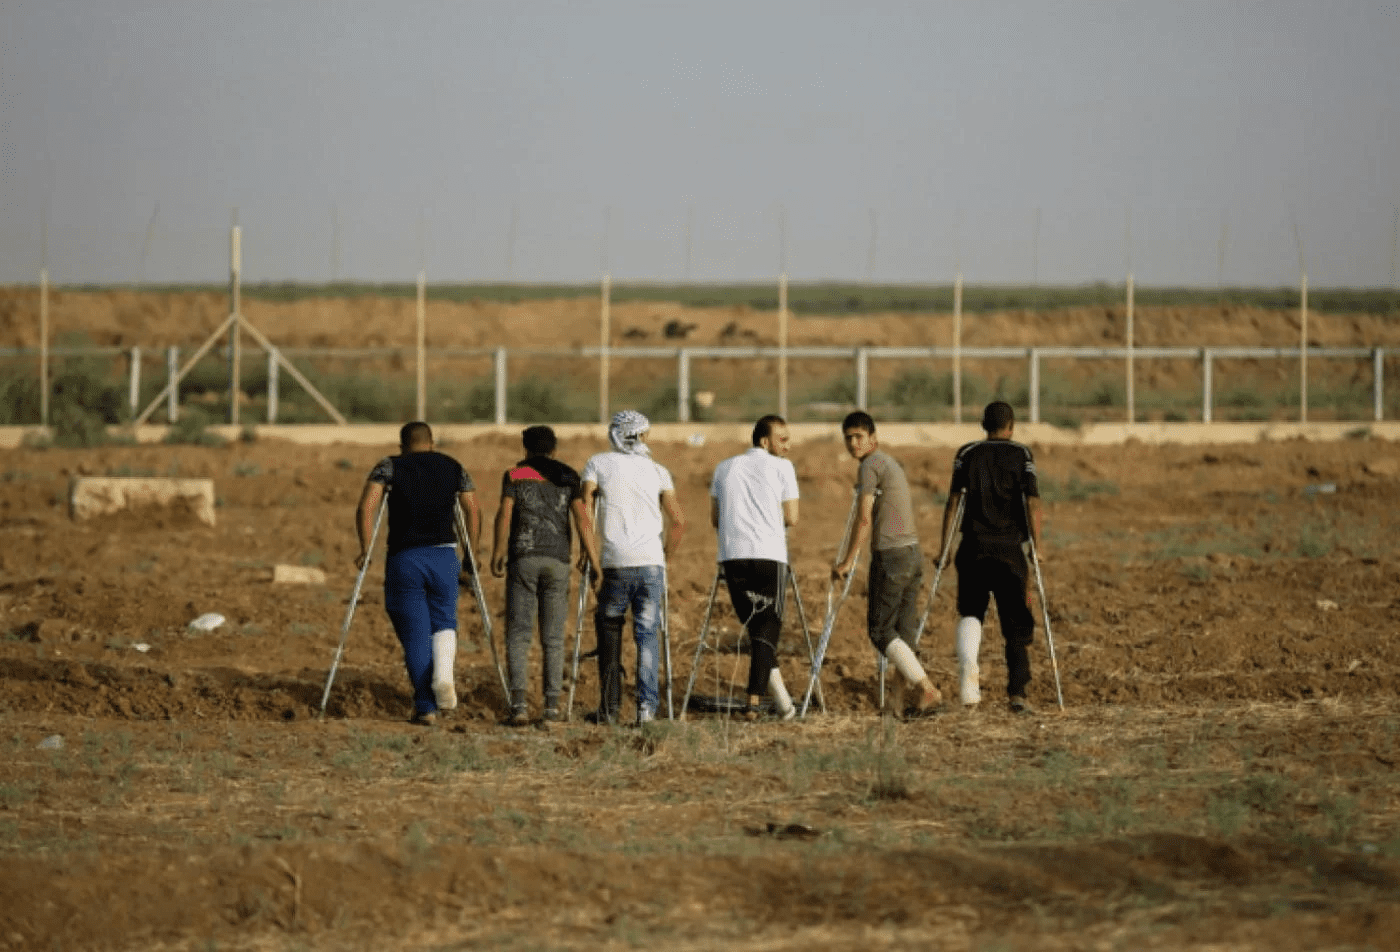 Palestinians shot in the legs by Israeli occupation forces while participating in the Great March of Return protests on Gaza. Photo:Mohammed al-Hajjar/Middle East Eye